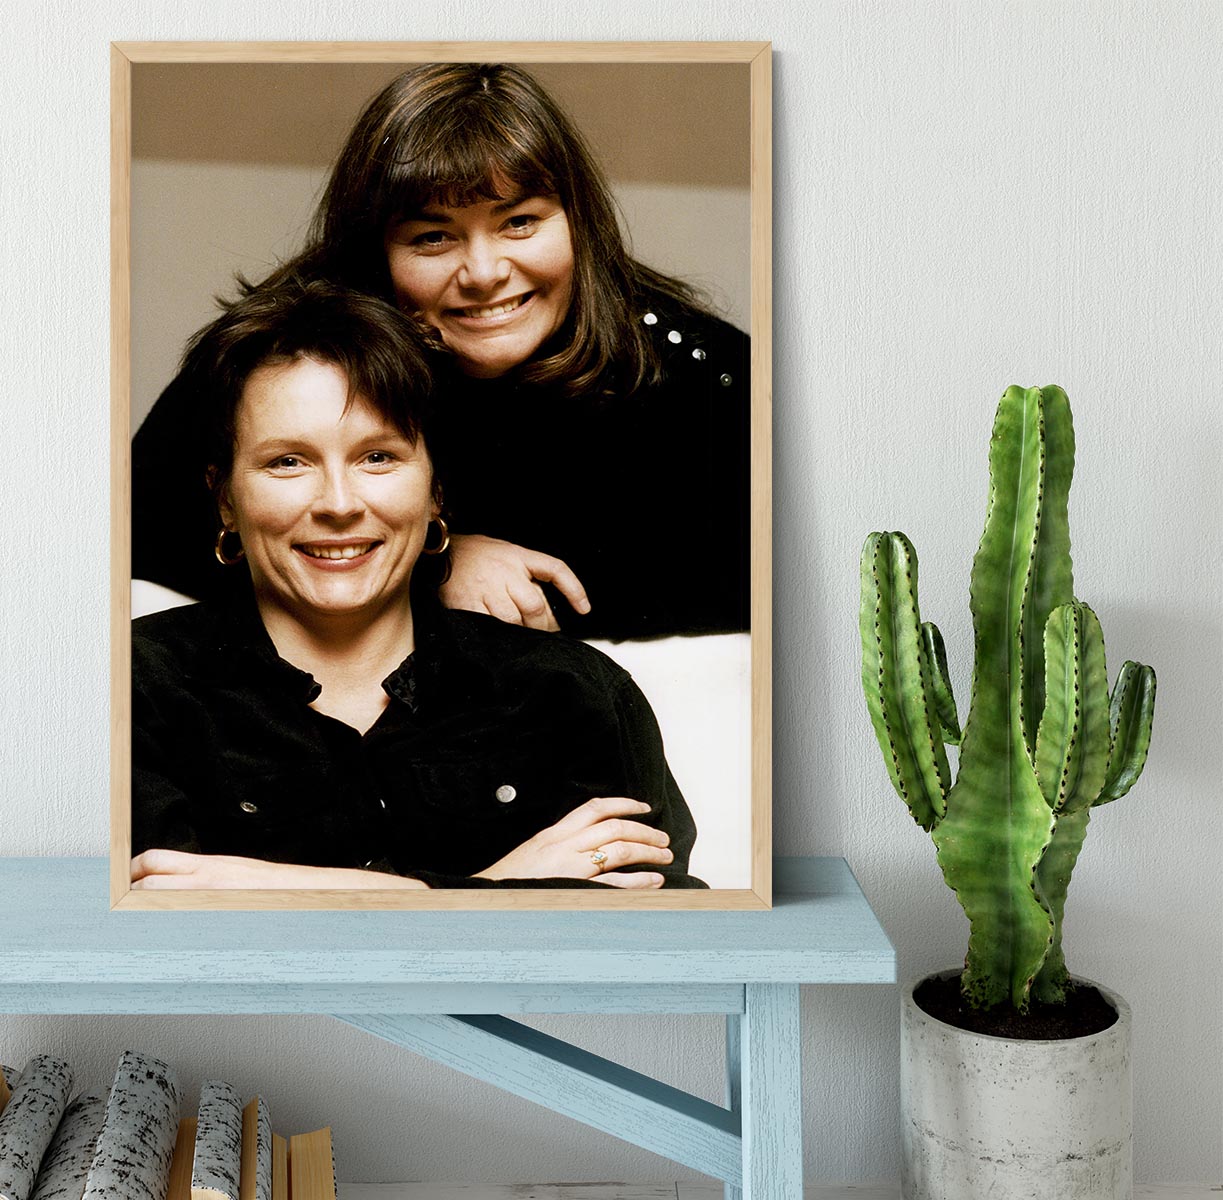 French and Saunders Framed Print - Canvas Art Rocks - 4